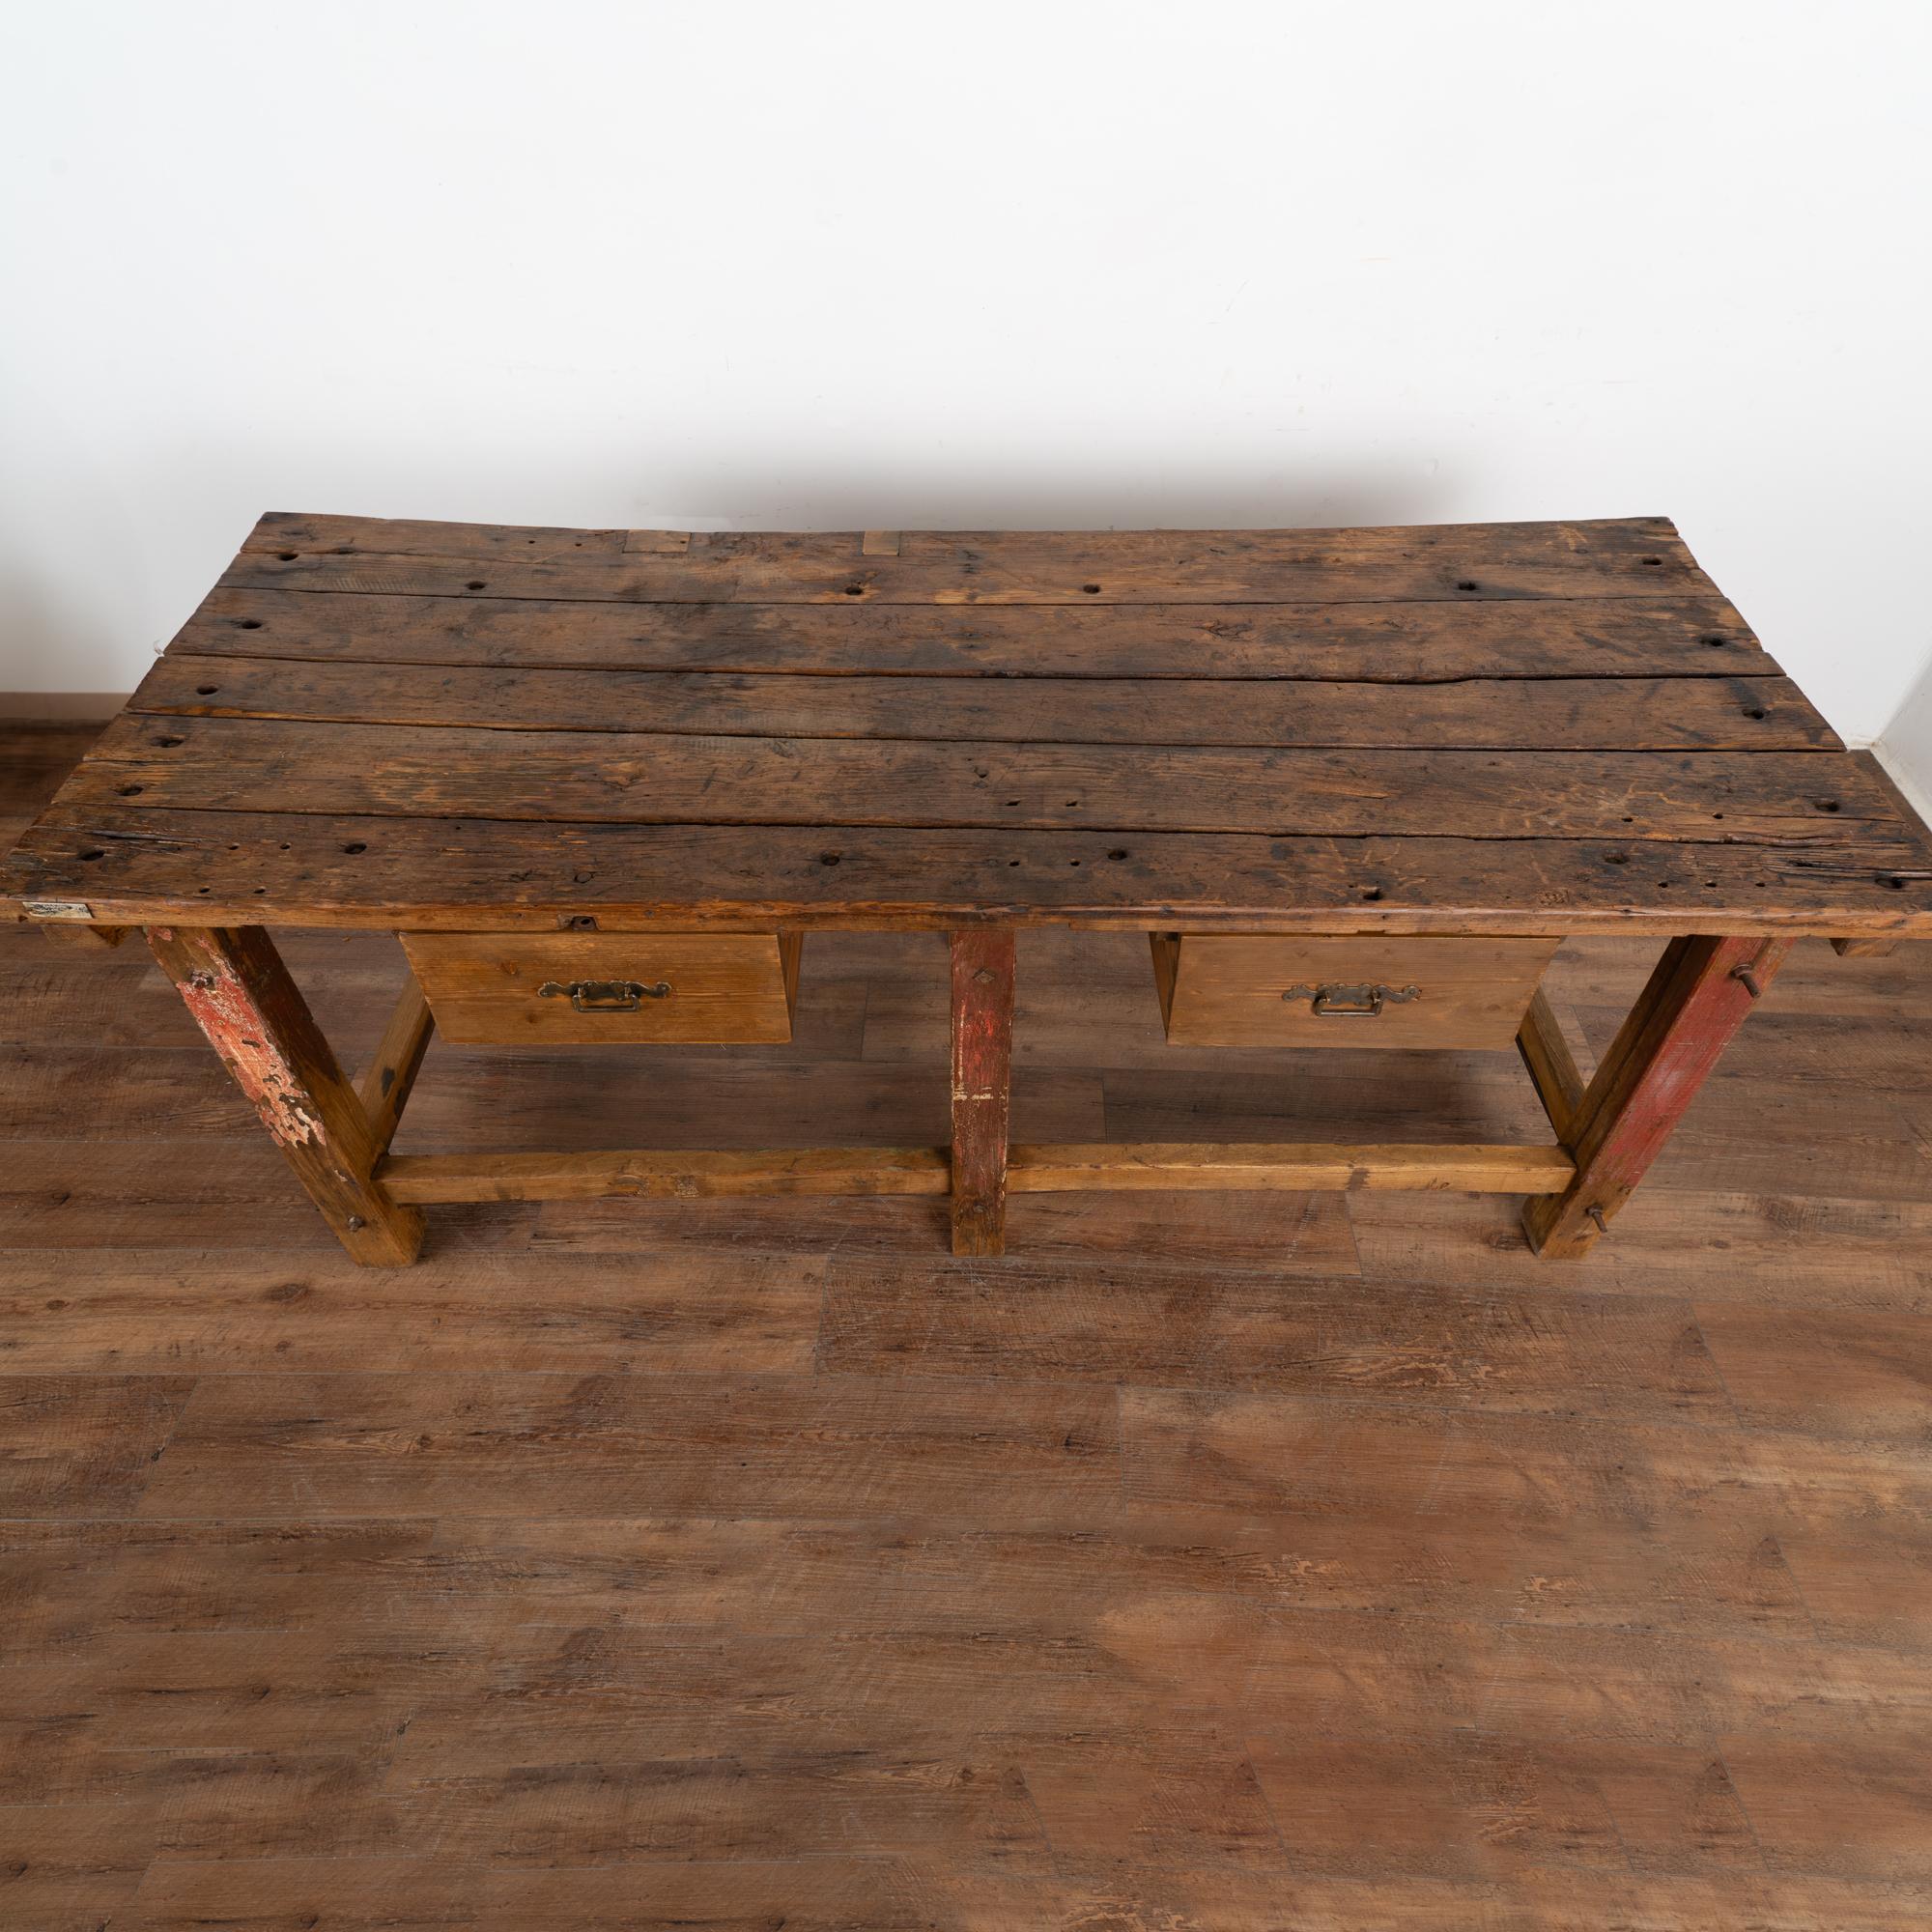 Hungarian Antique Rustic Work Table With Two Drawers from Hungary circa 1880 For Sale